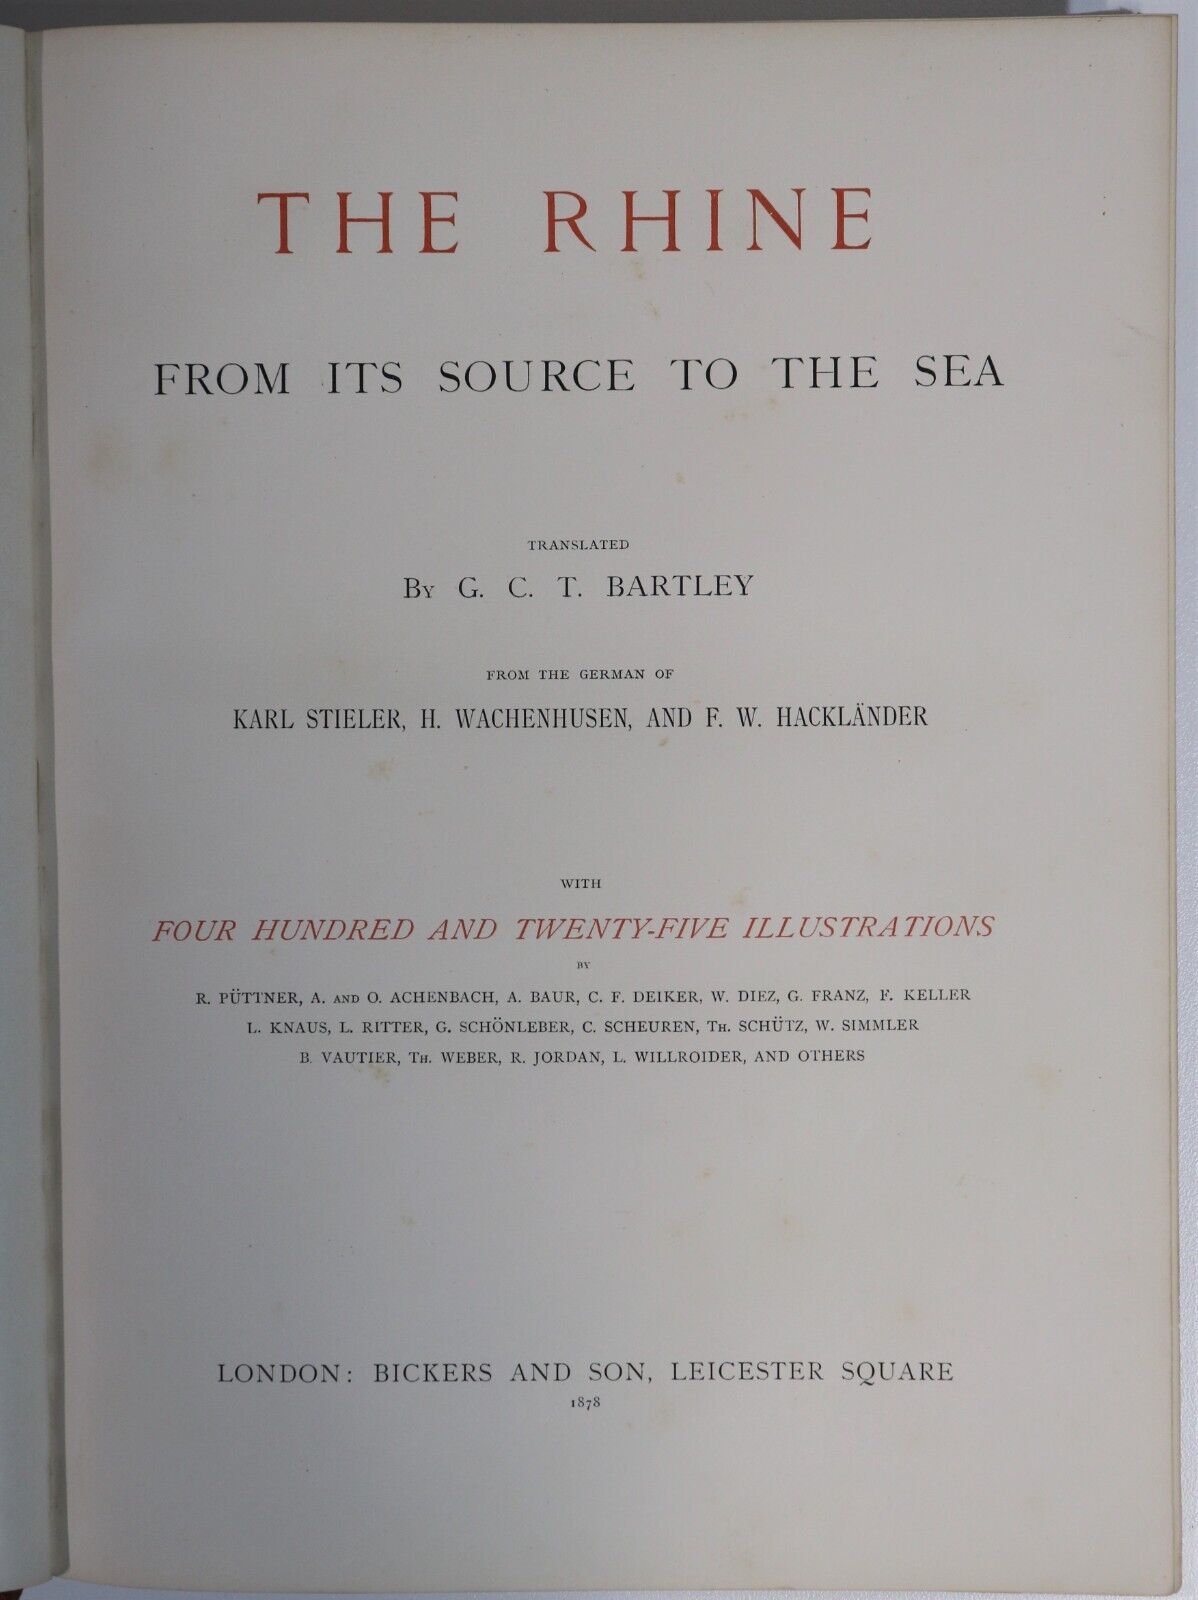 The Rhine: From Source To The Sea by G Bartley - 1878 - Antique Picturesque Book - 0